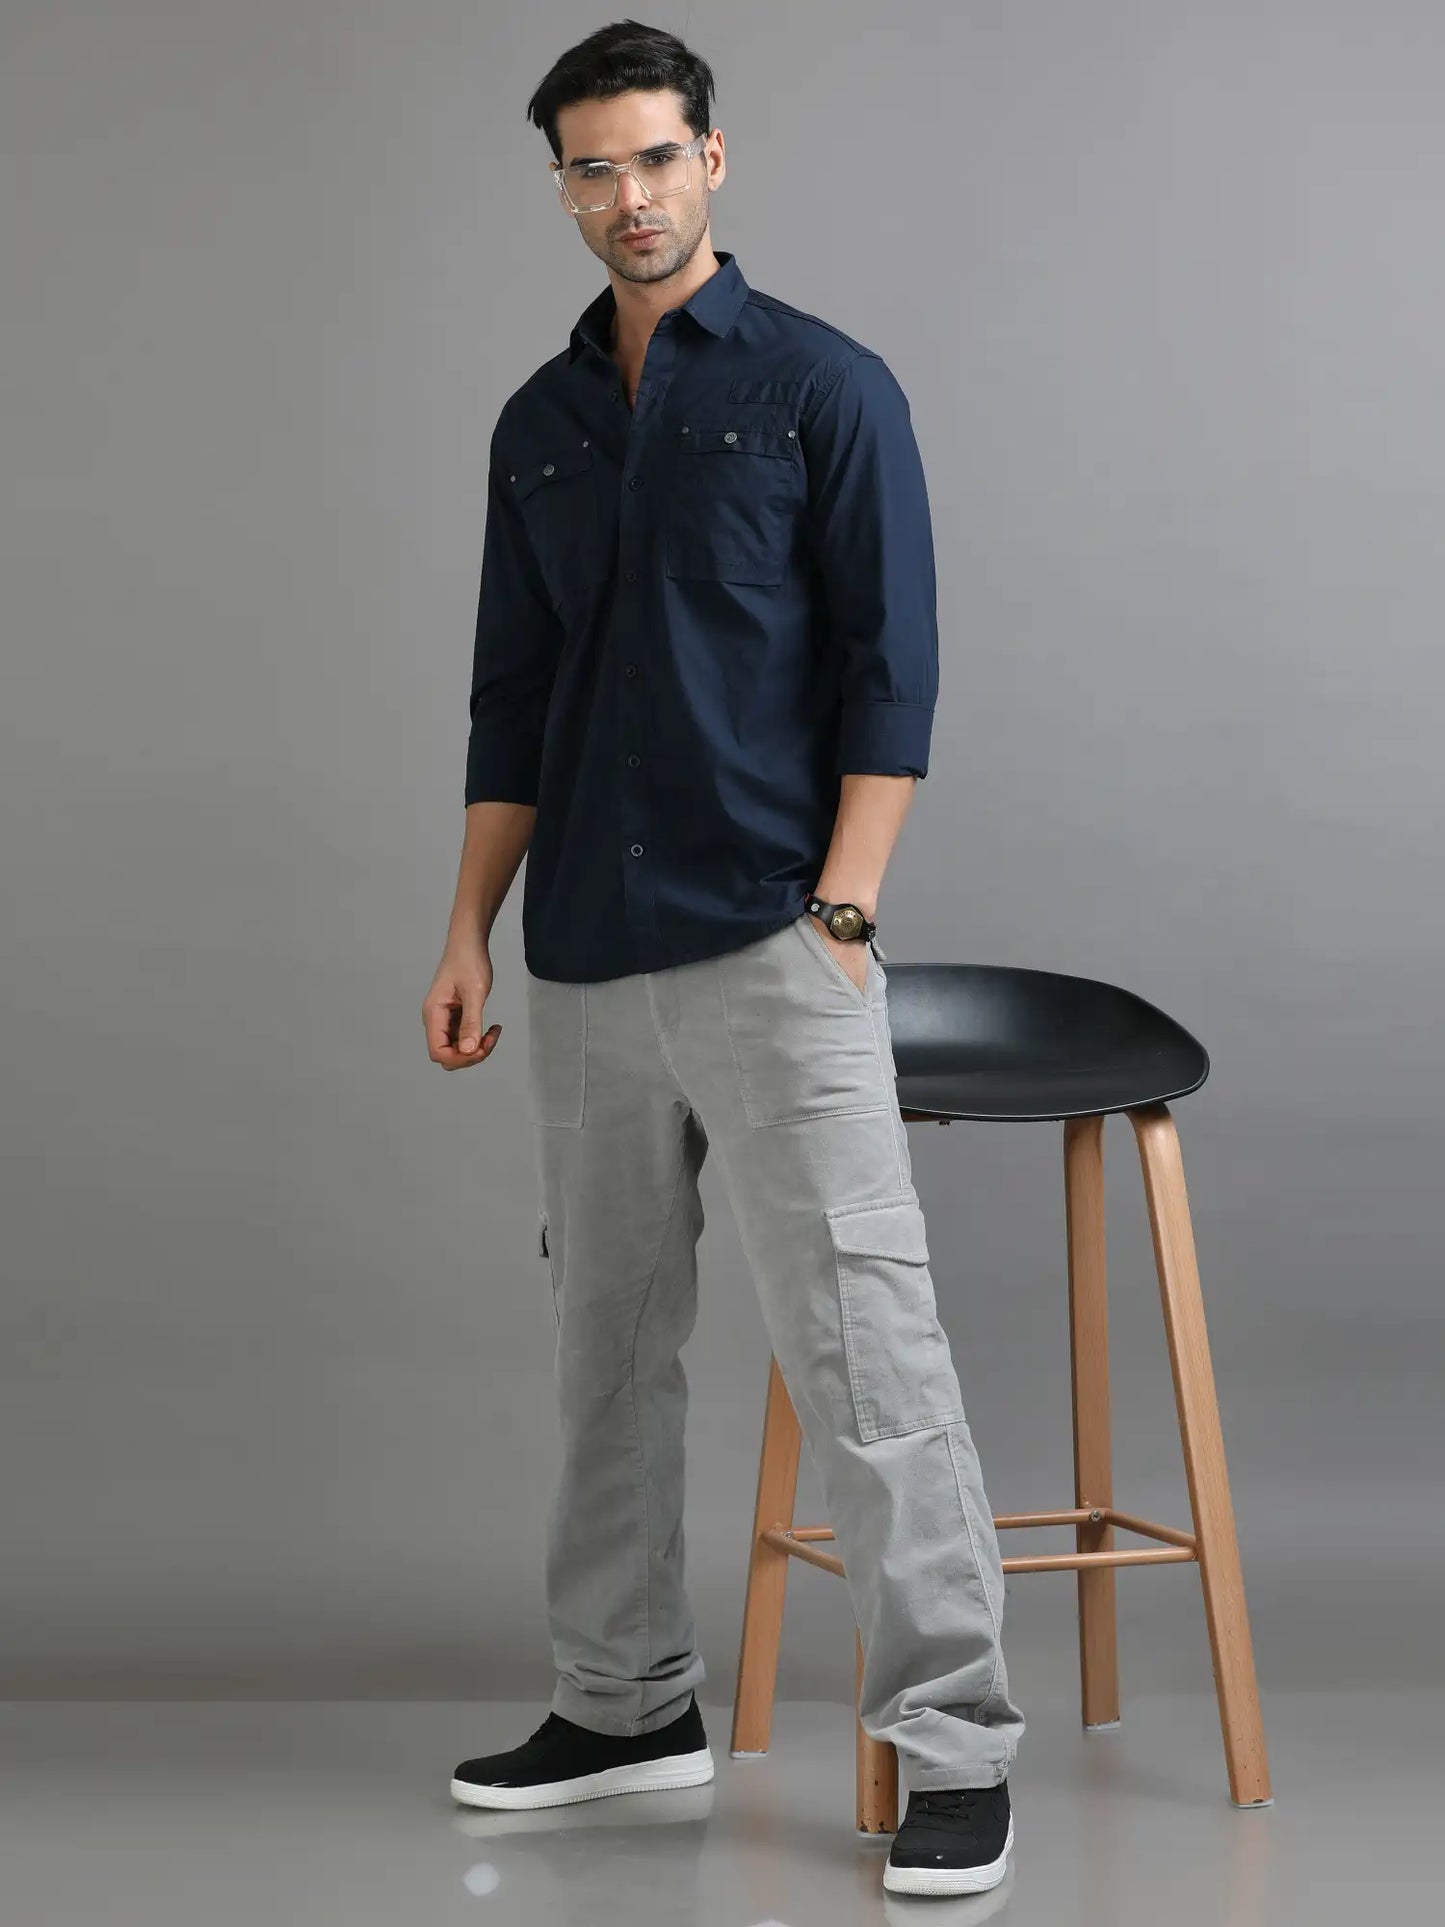 Classic Navy Blue Solid Shirt for Men